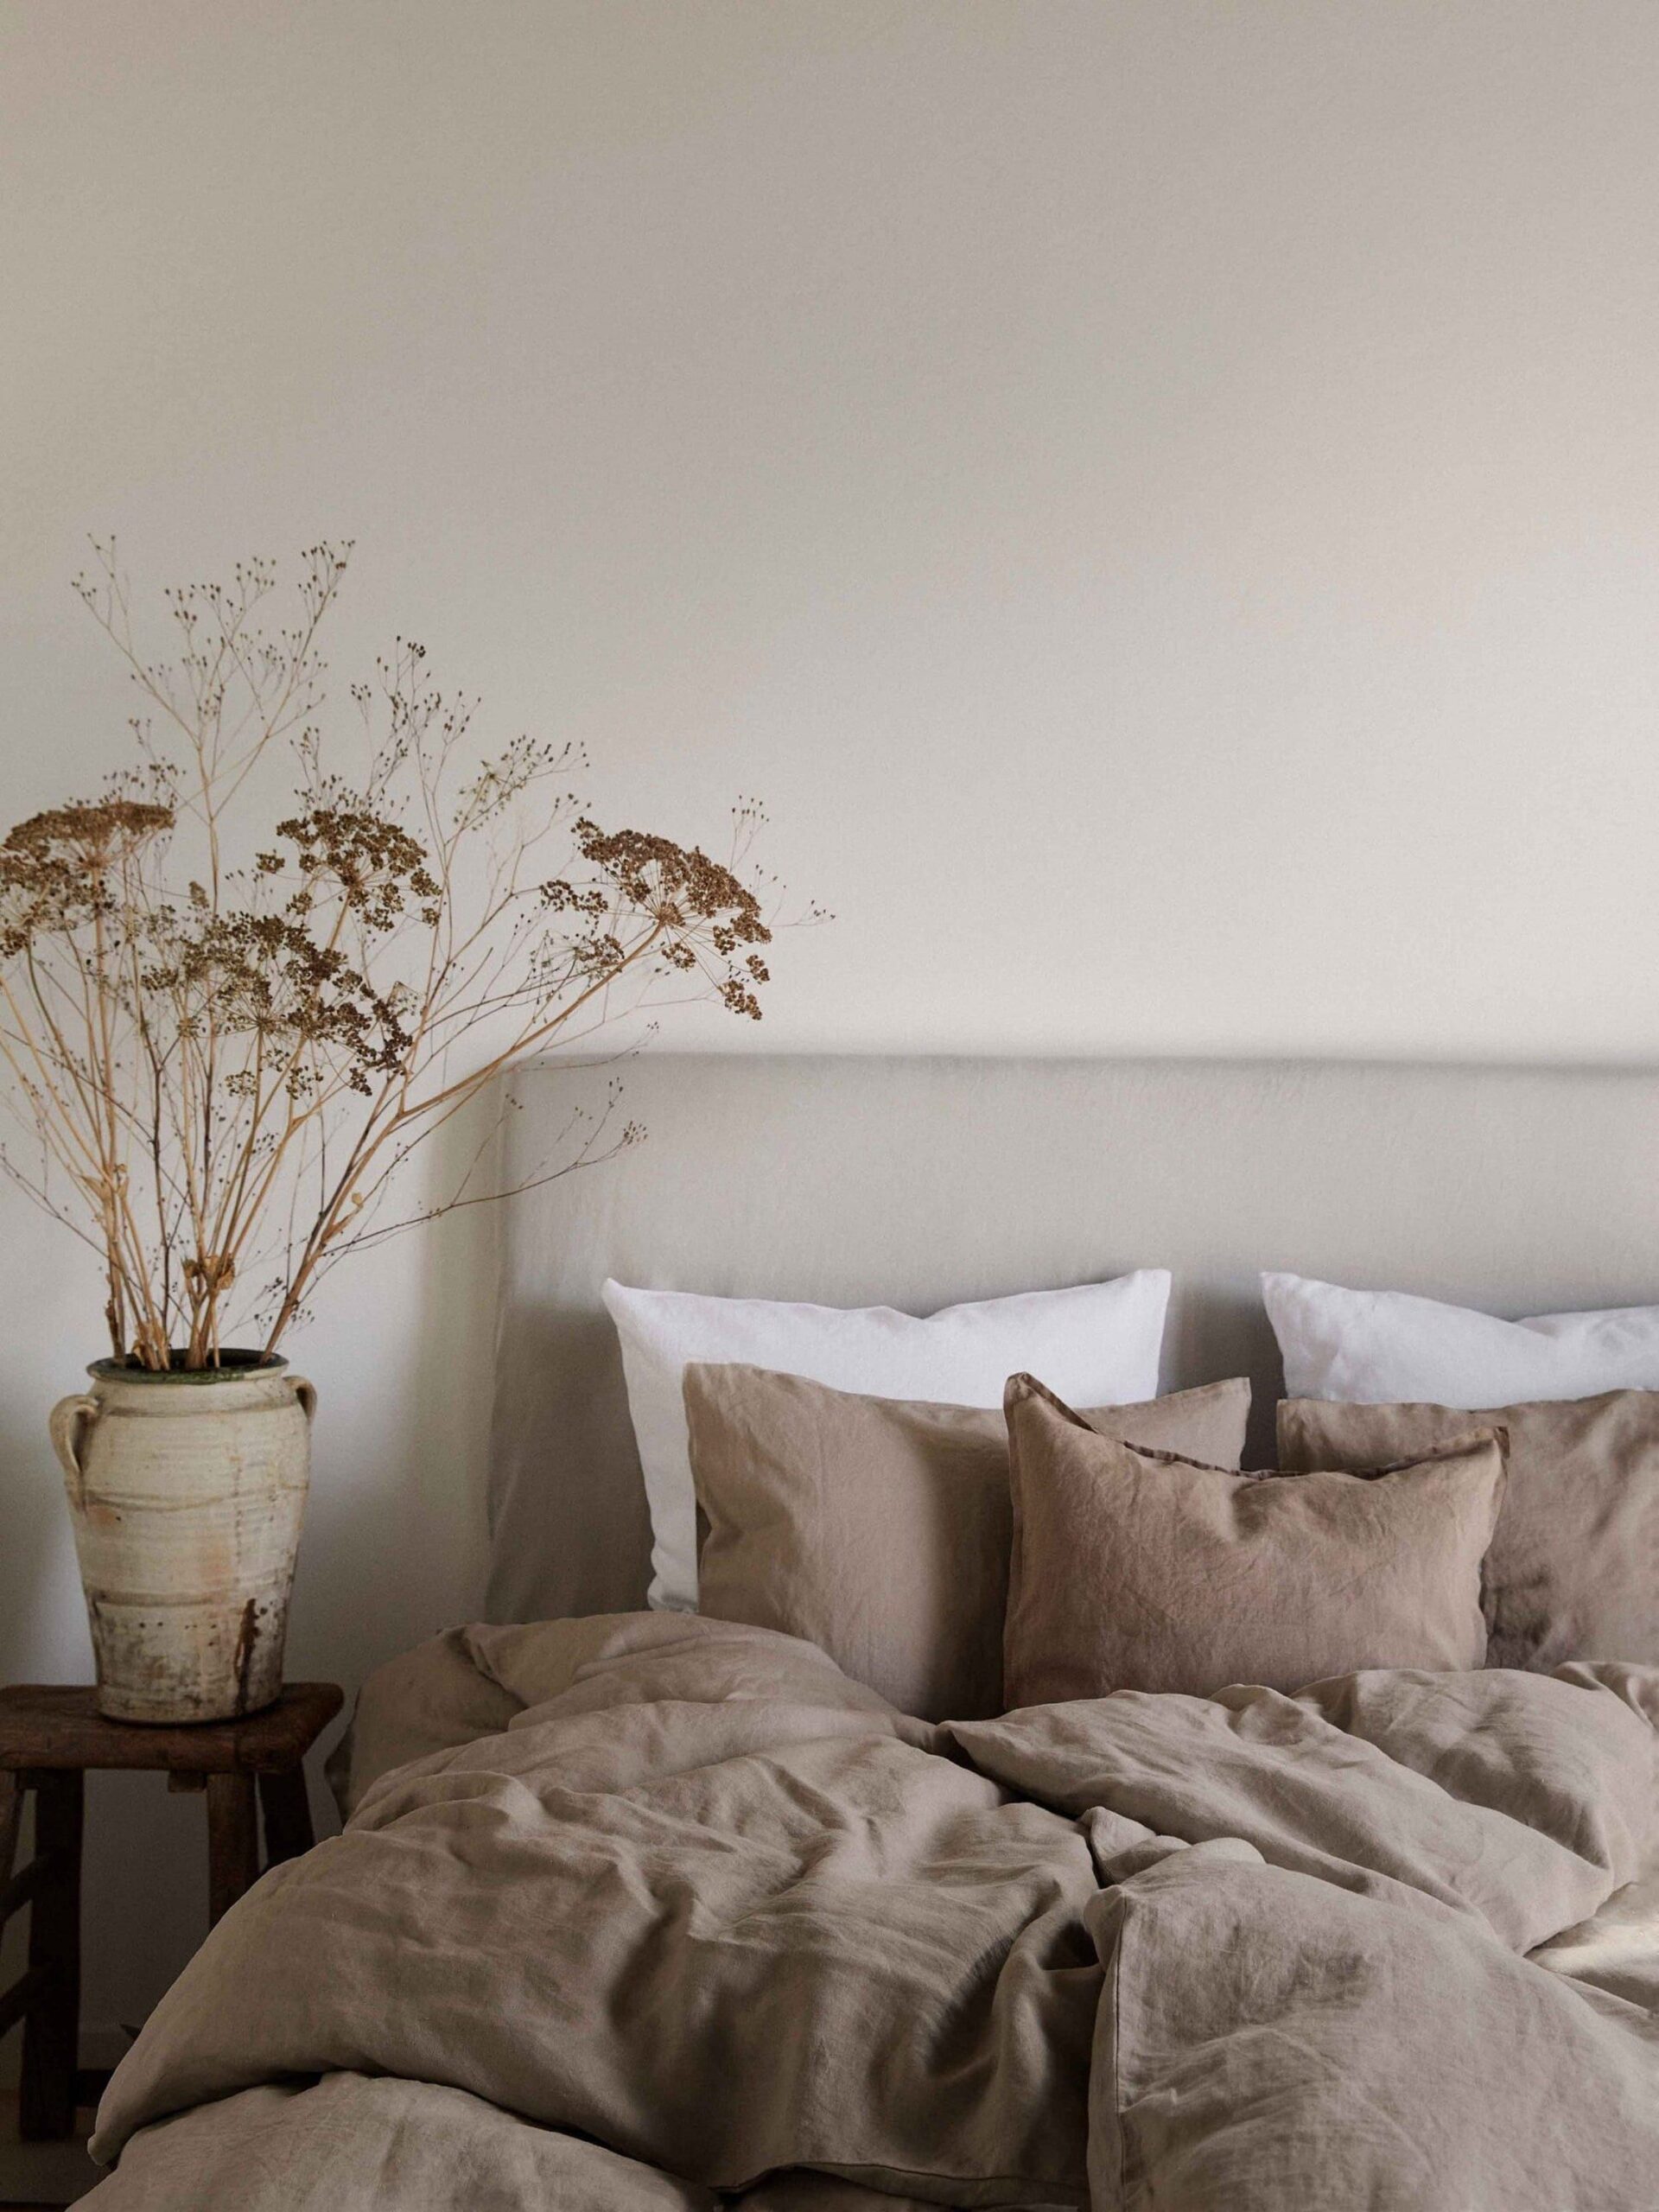 Duvet Covers : The Best Duvet Cover Brands for a Cozy Bedroom Upgrade